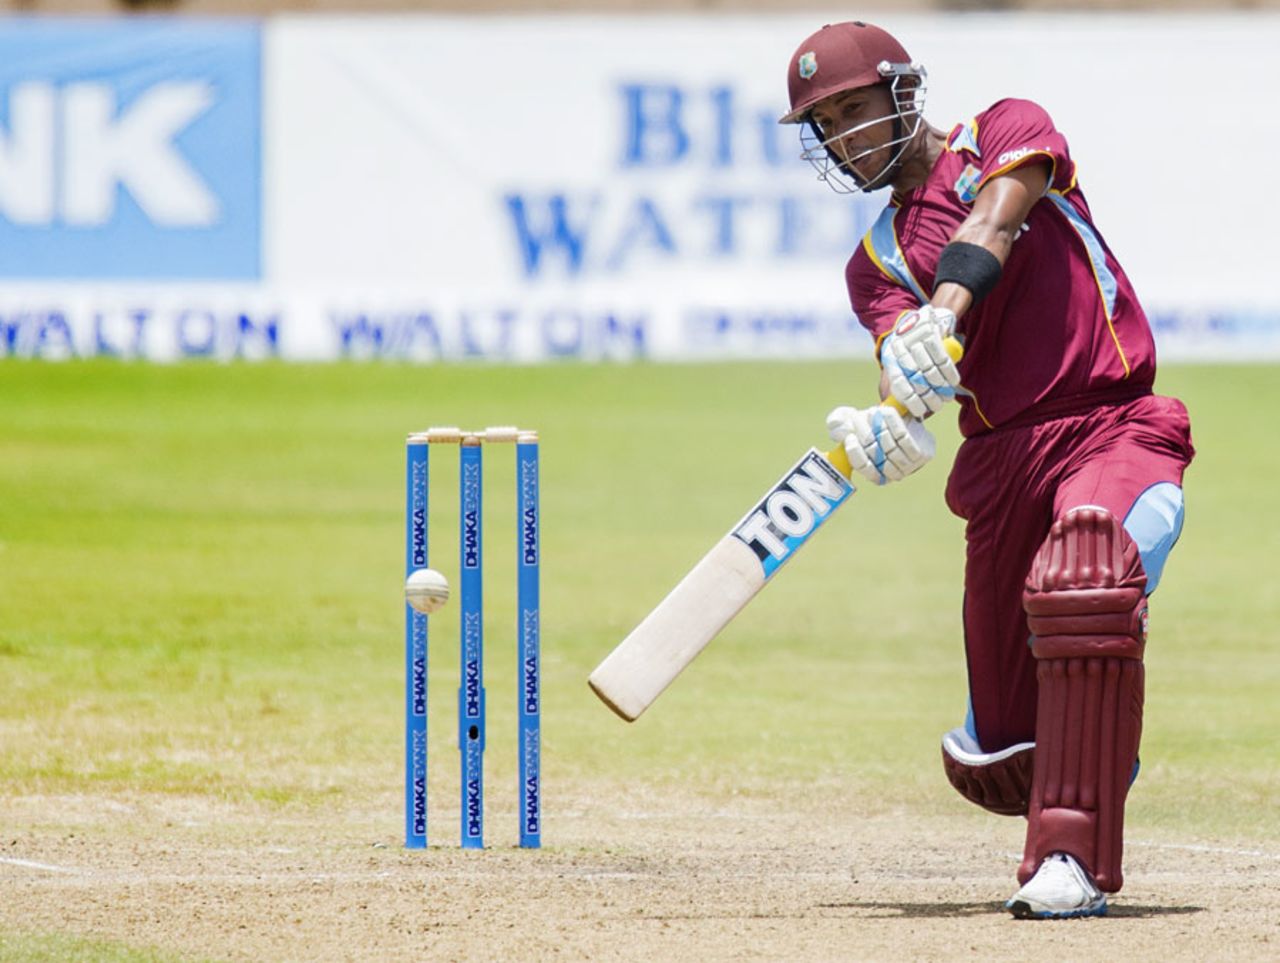 Lendl Simmons launches the ball over the off side, West Indies v Bangladesh, 2nd ODI, St George's, Grenada, August 22, 2014